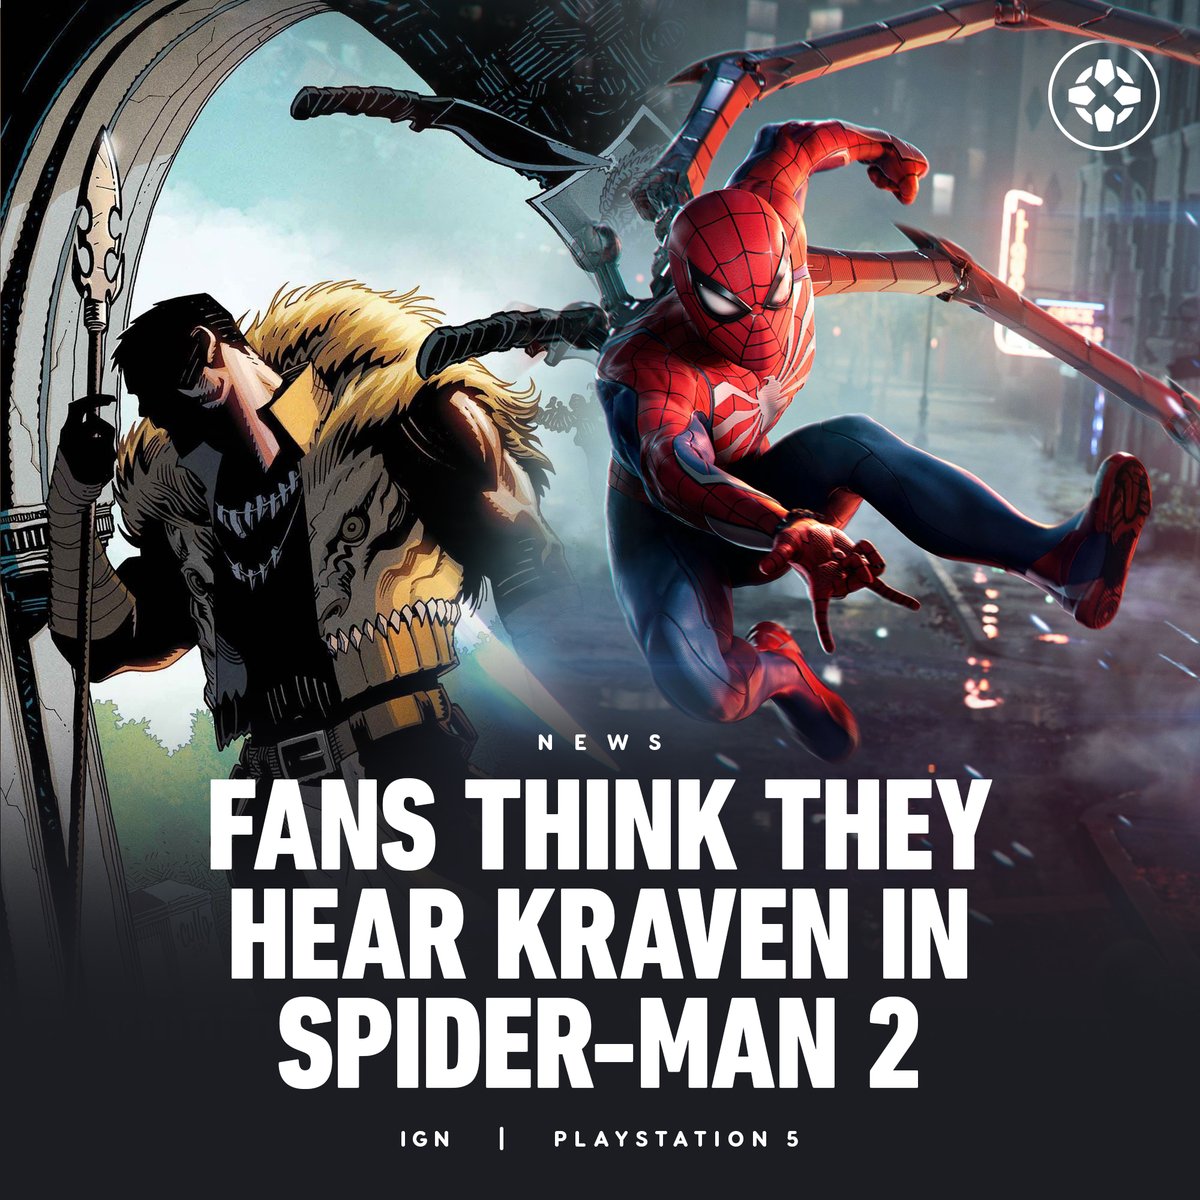 RT @IGN: Fans believe the voice that can be heard in the new Spider-Man 2 reveal trailer is Kraven. Thoughts? https://t.co/uyGmehTI0d